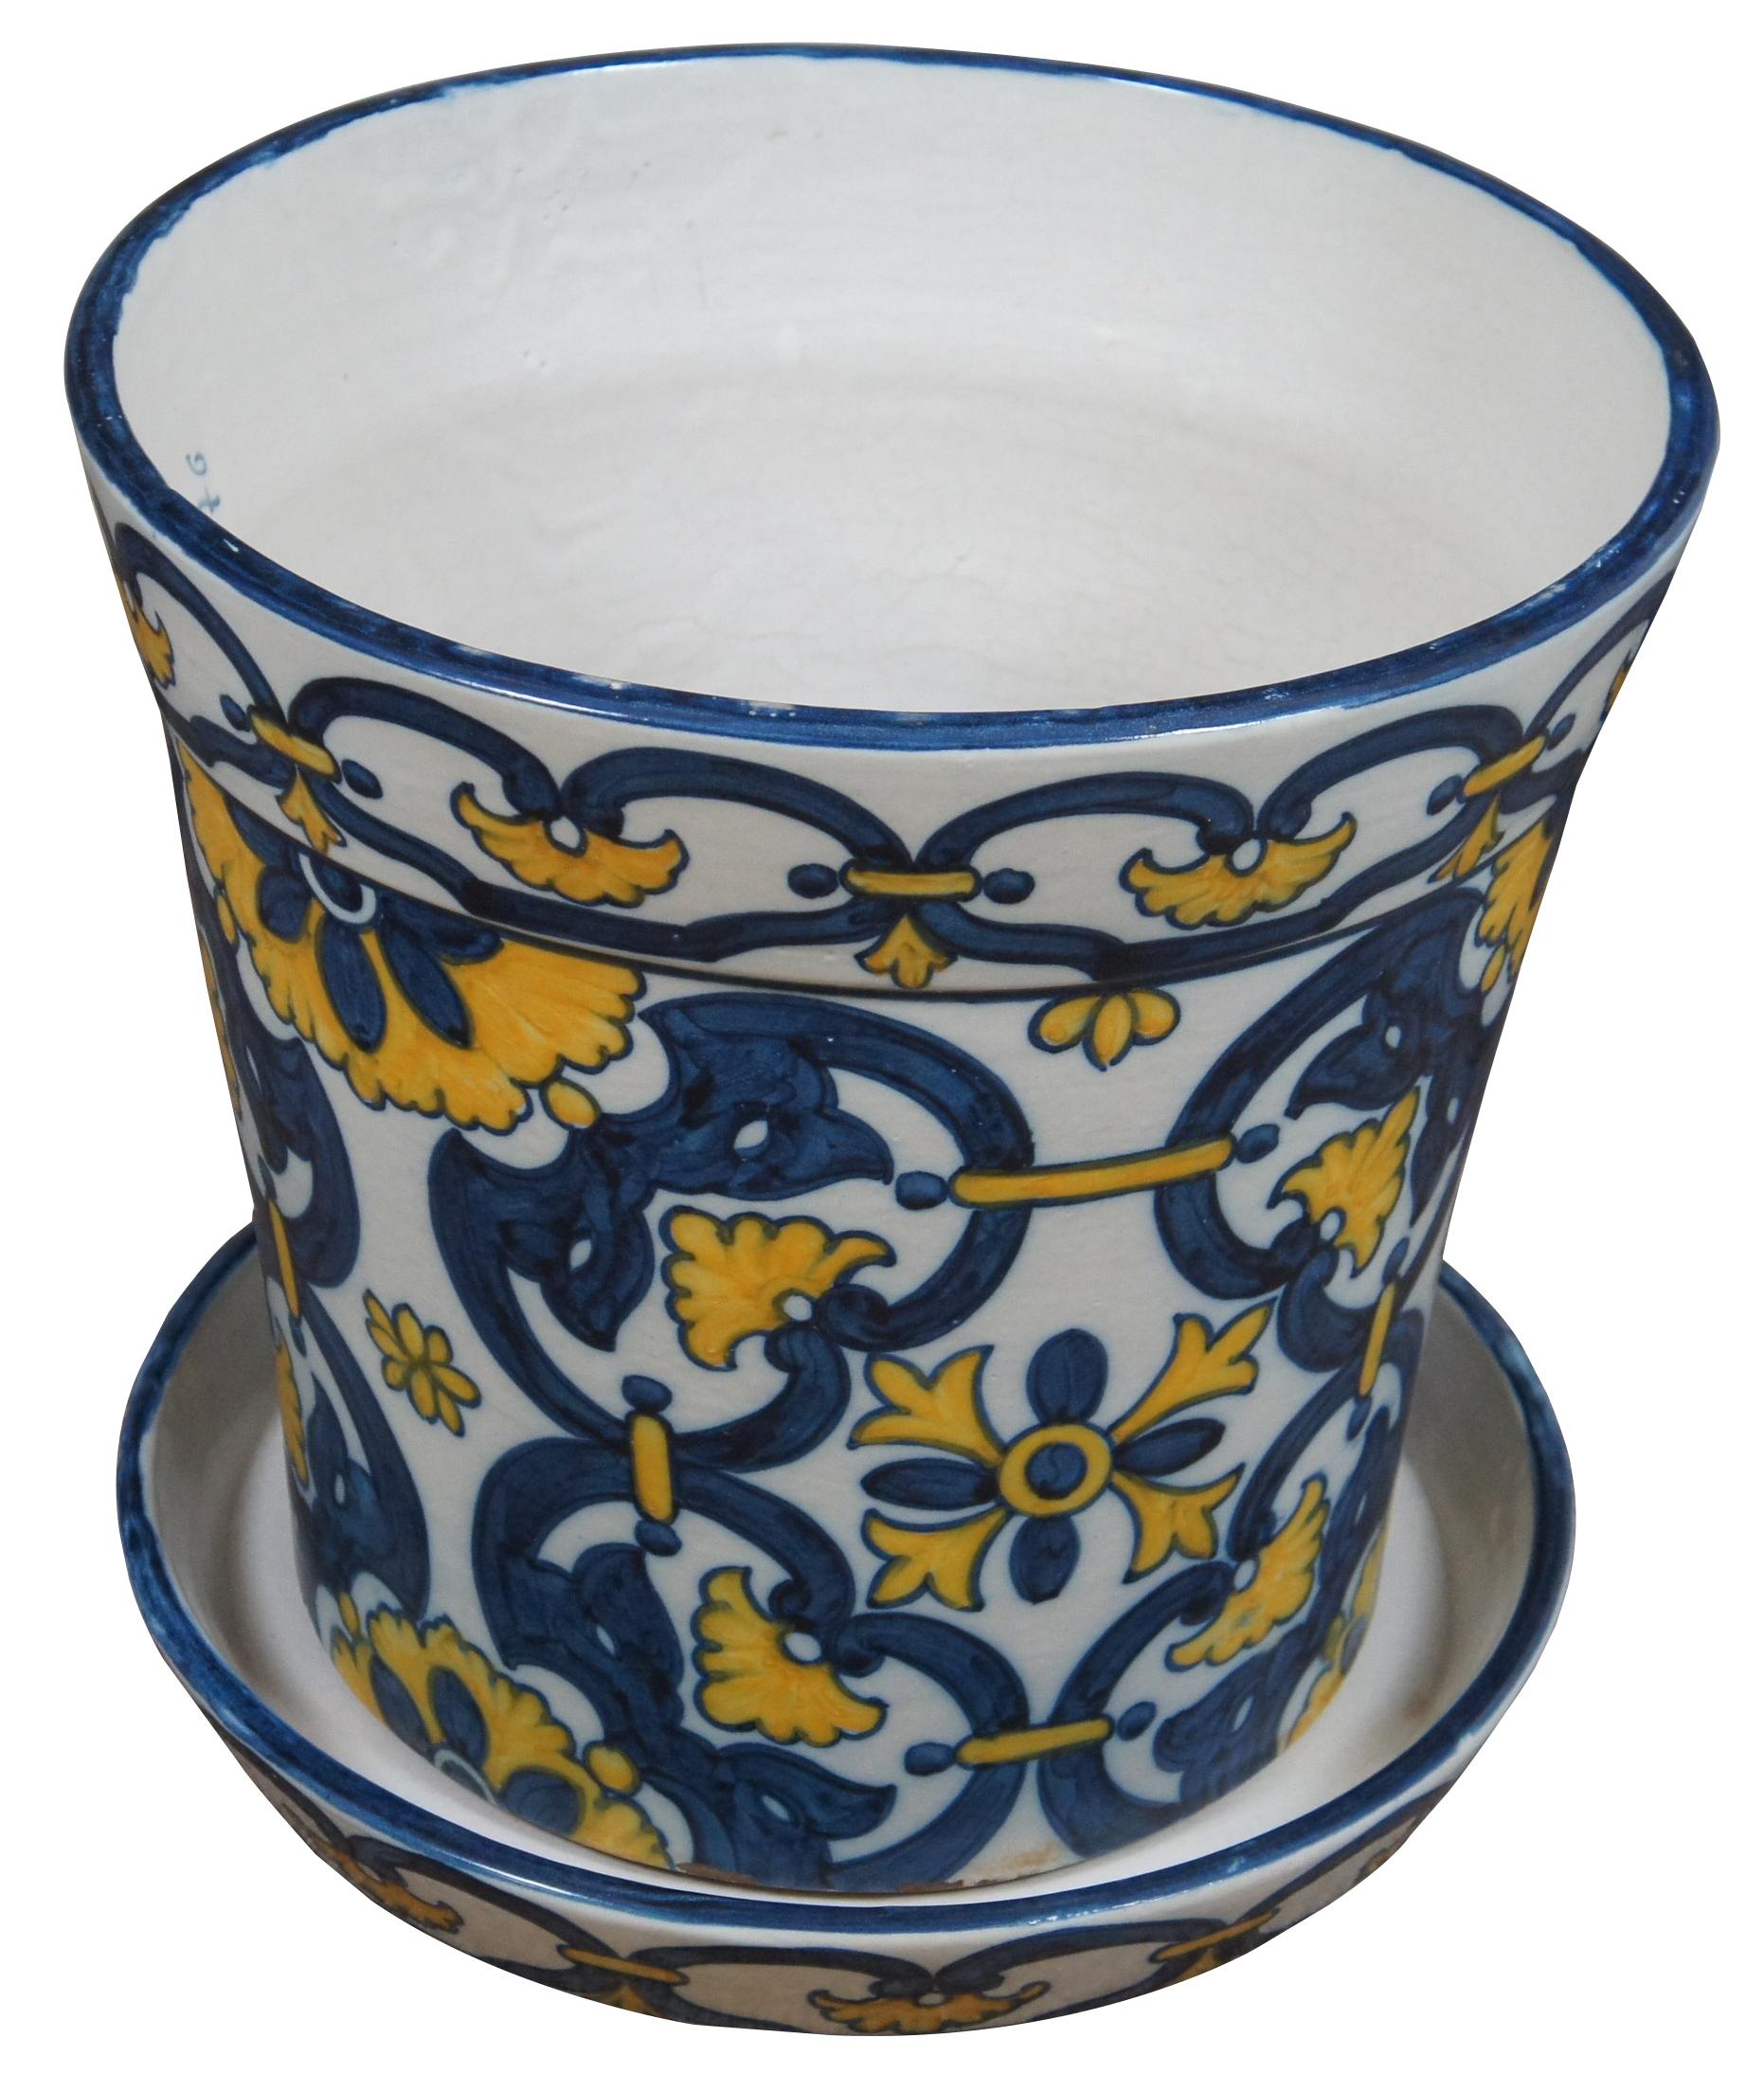 Vintage hand crafted Sant’Anna Portuguese pottery, very large flower pot or planter and underplate in white decorated with blue and yellow floral designs, made in 1976. “Sant’Anna is a Portuguese ceramic factory, established on 1741, that produces